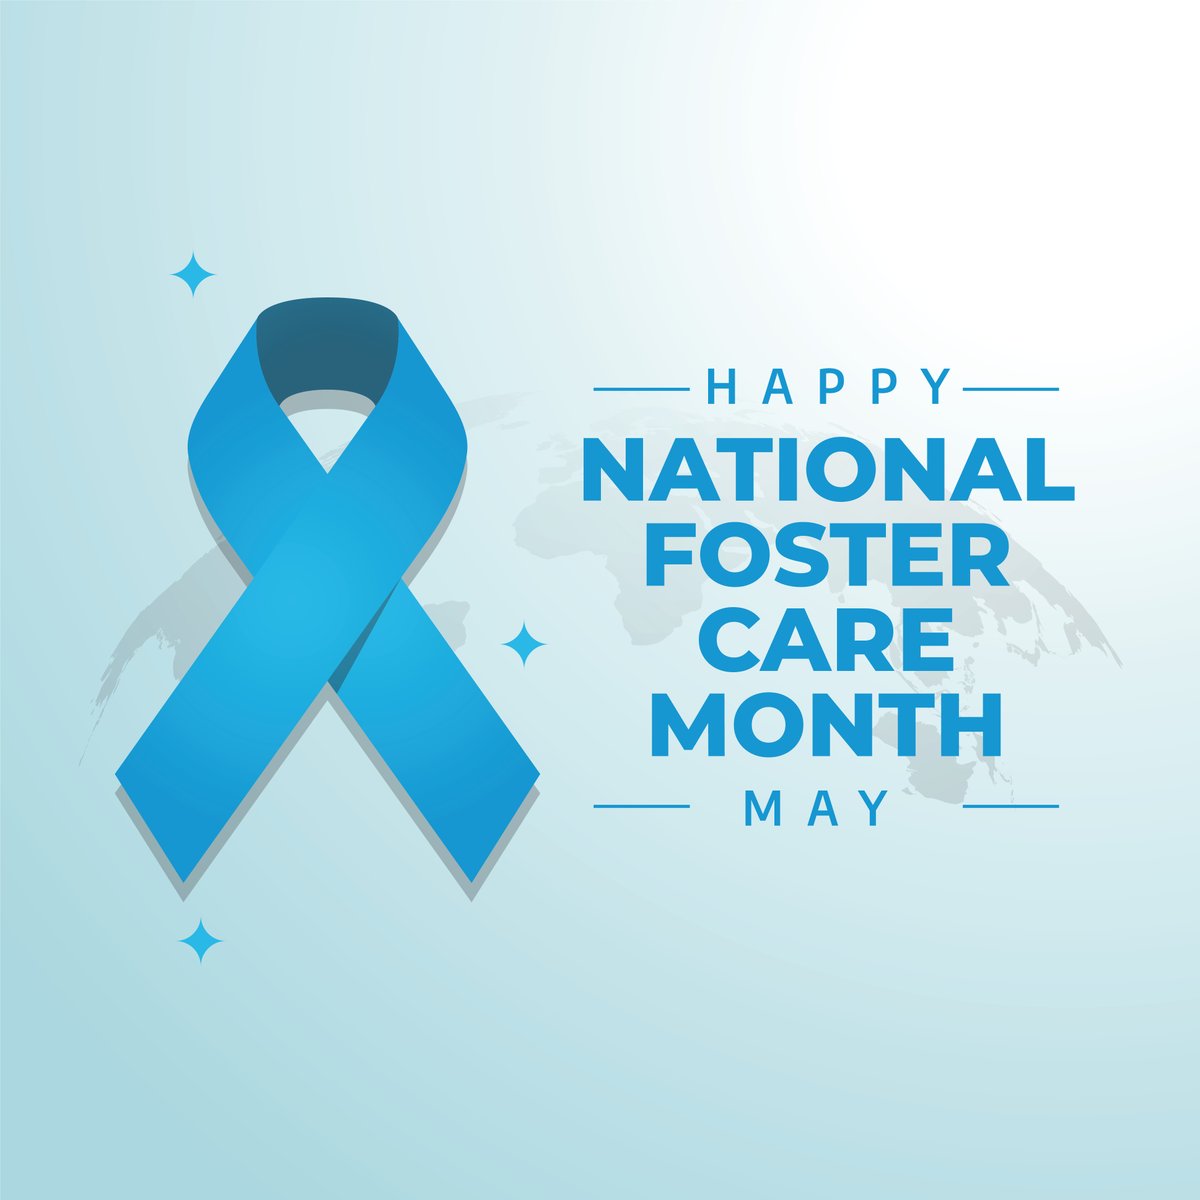 #FosterCareMonth: Let’s honor the incredible efforts of foster families, social workers, volunteers and advocates who make differences in lives of children in need here in Arapahoe County! On any given day, 524 kids are in out-of-home care in the county. arapahoeco.gov/news_detail_T1…